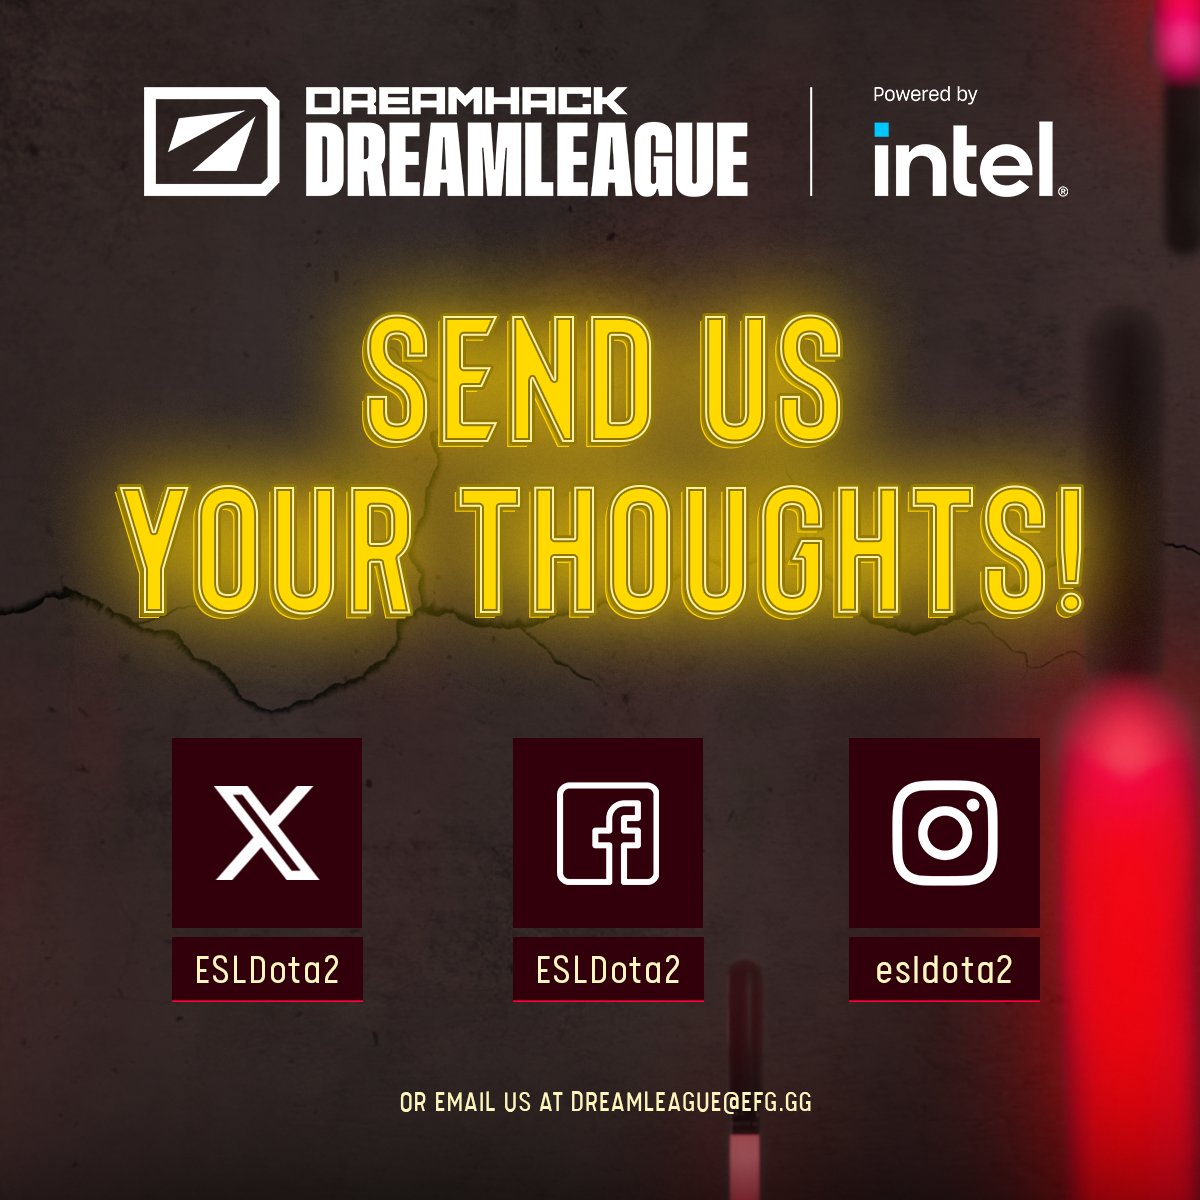 We're keen to hear your thoughts on #DreamLeague S23 and the new patch! Send us your thoughts either on Social Media or via dreamleague@efg.gg and there's a chance we'll read them out on broadcast! 📺